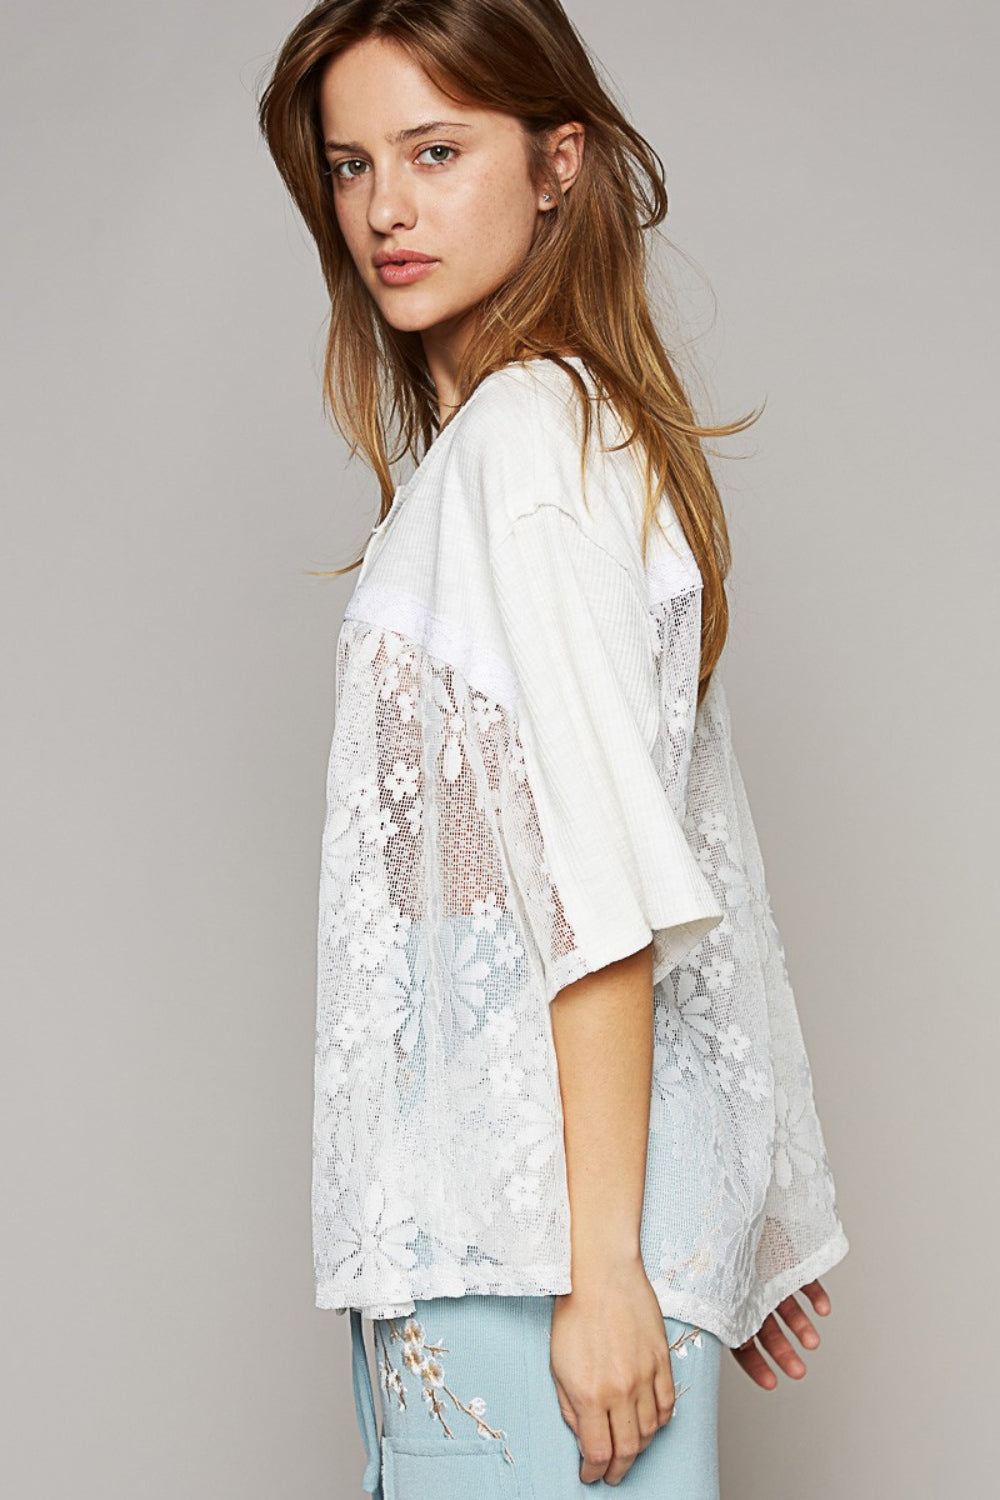 This Round Neck Short Sleeve Lace Top is a delicate and elegant addition to your wardrobe. The lace detailing adds a touch of romance and femininity to the top, making it perfect for both casual and dressy occasions. With a classic round neck design, this top is flattering and versatile.  S - L